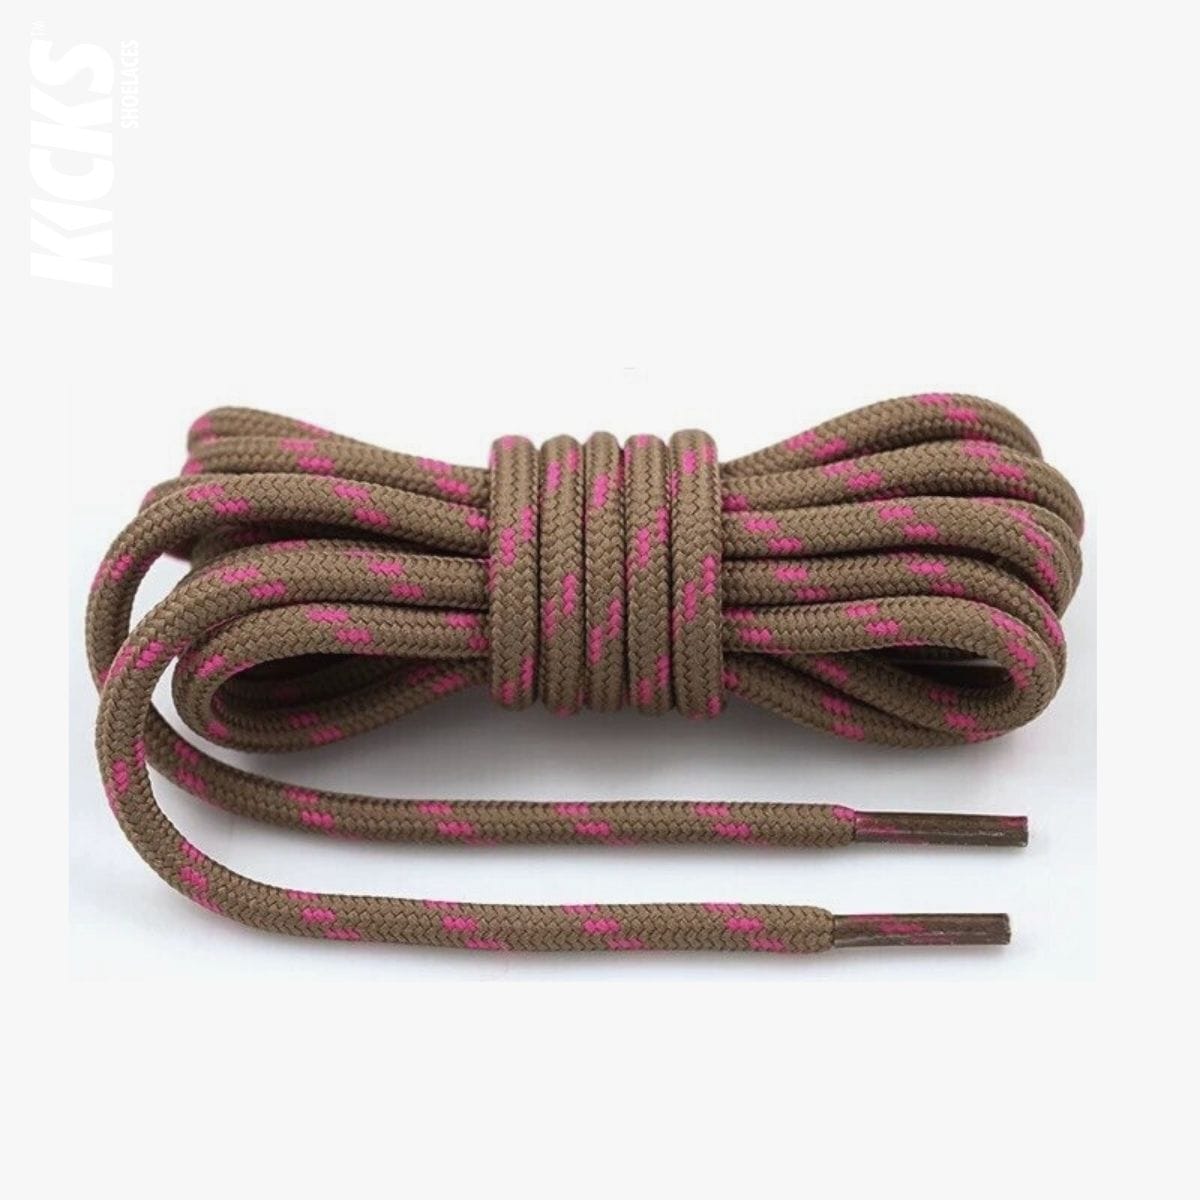 trekking-shoe-laces-united-states-in-brown-and-pink-shop-online